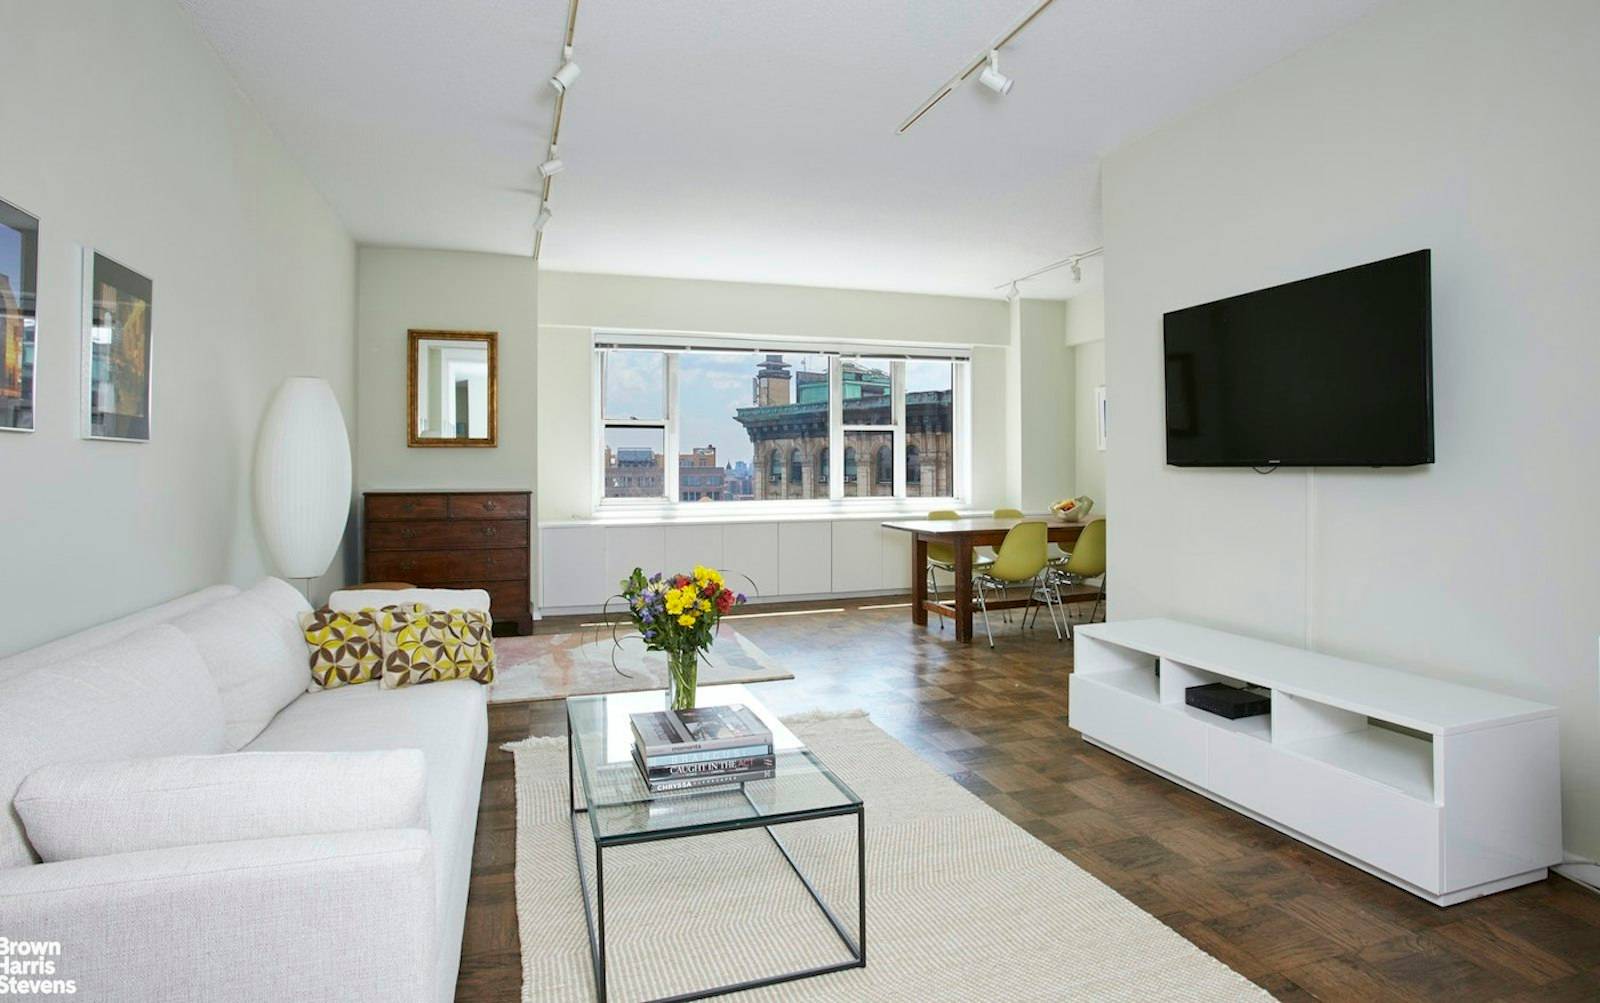 This beautifully furnished almost 1000' apartment on the 17th floor has high ceilings and amazing views.